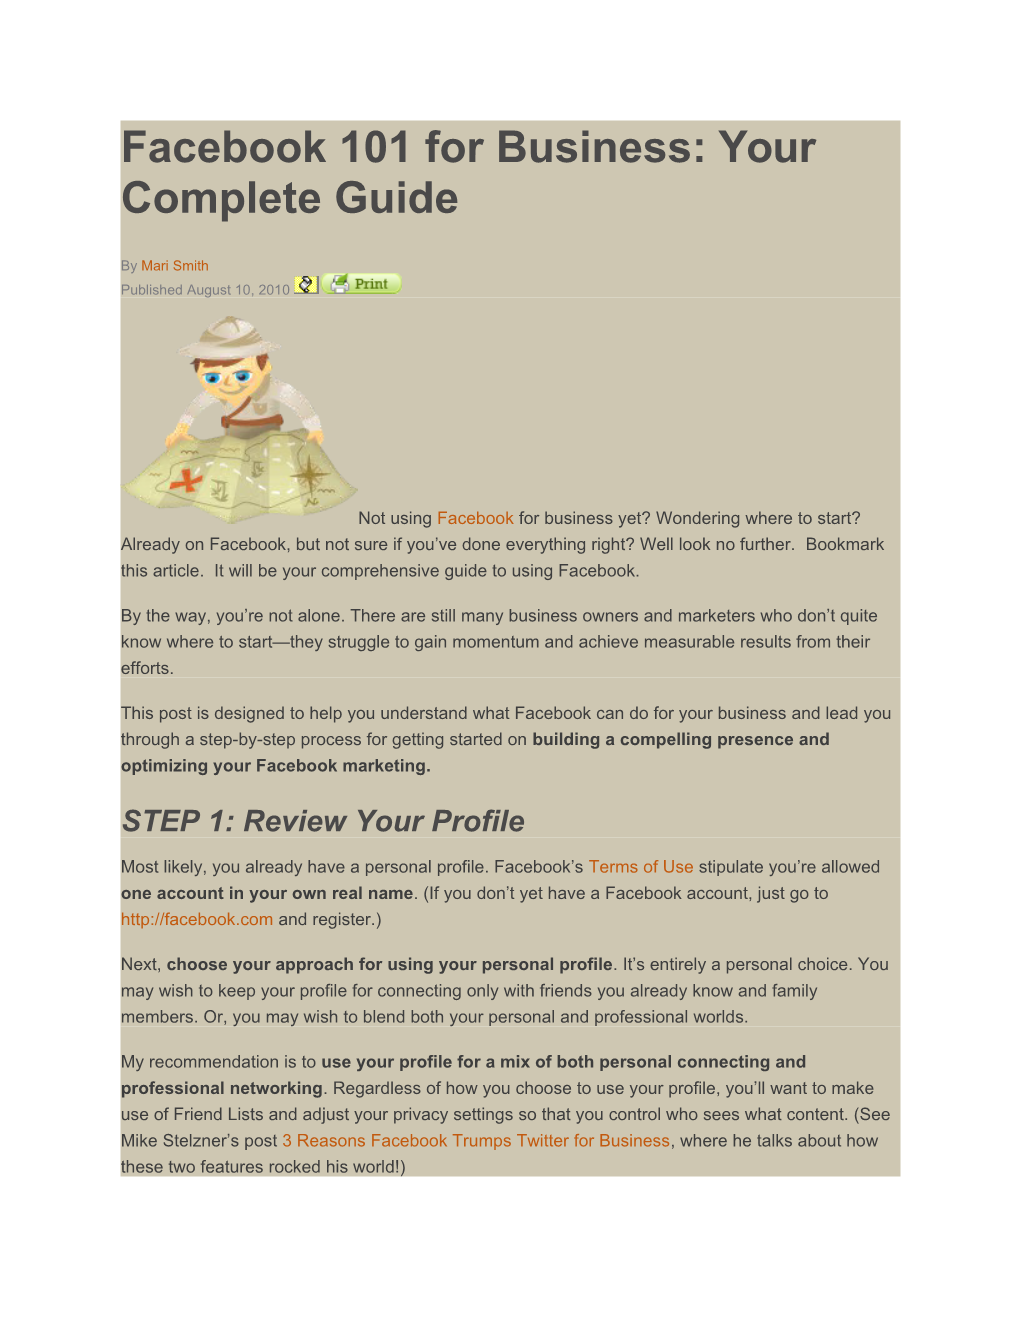 Facebook 101 for Business: Your Complete Guide